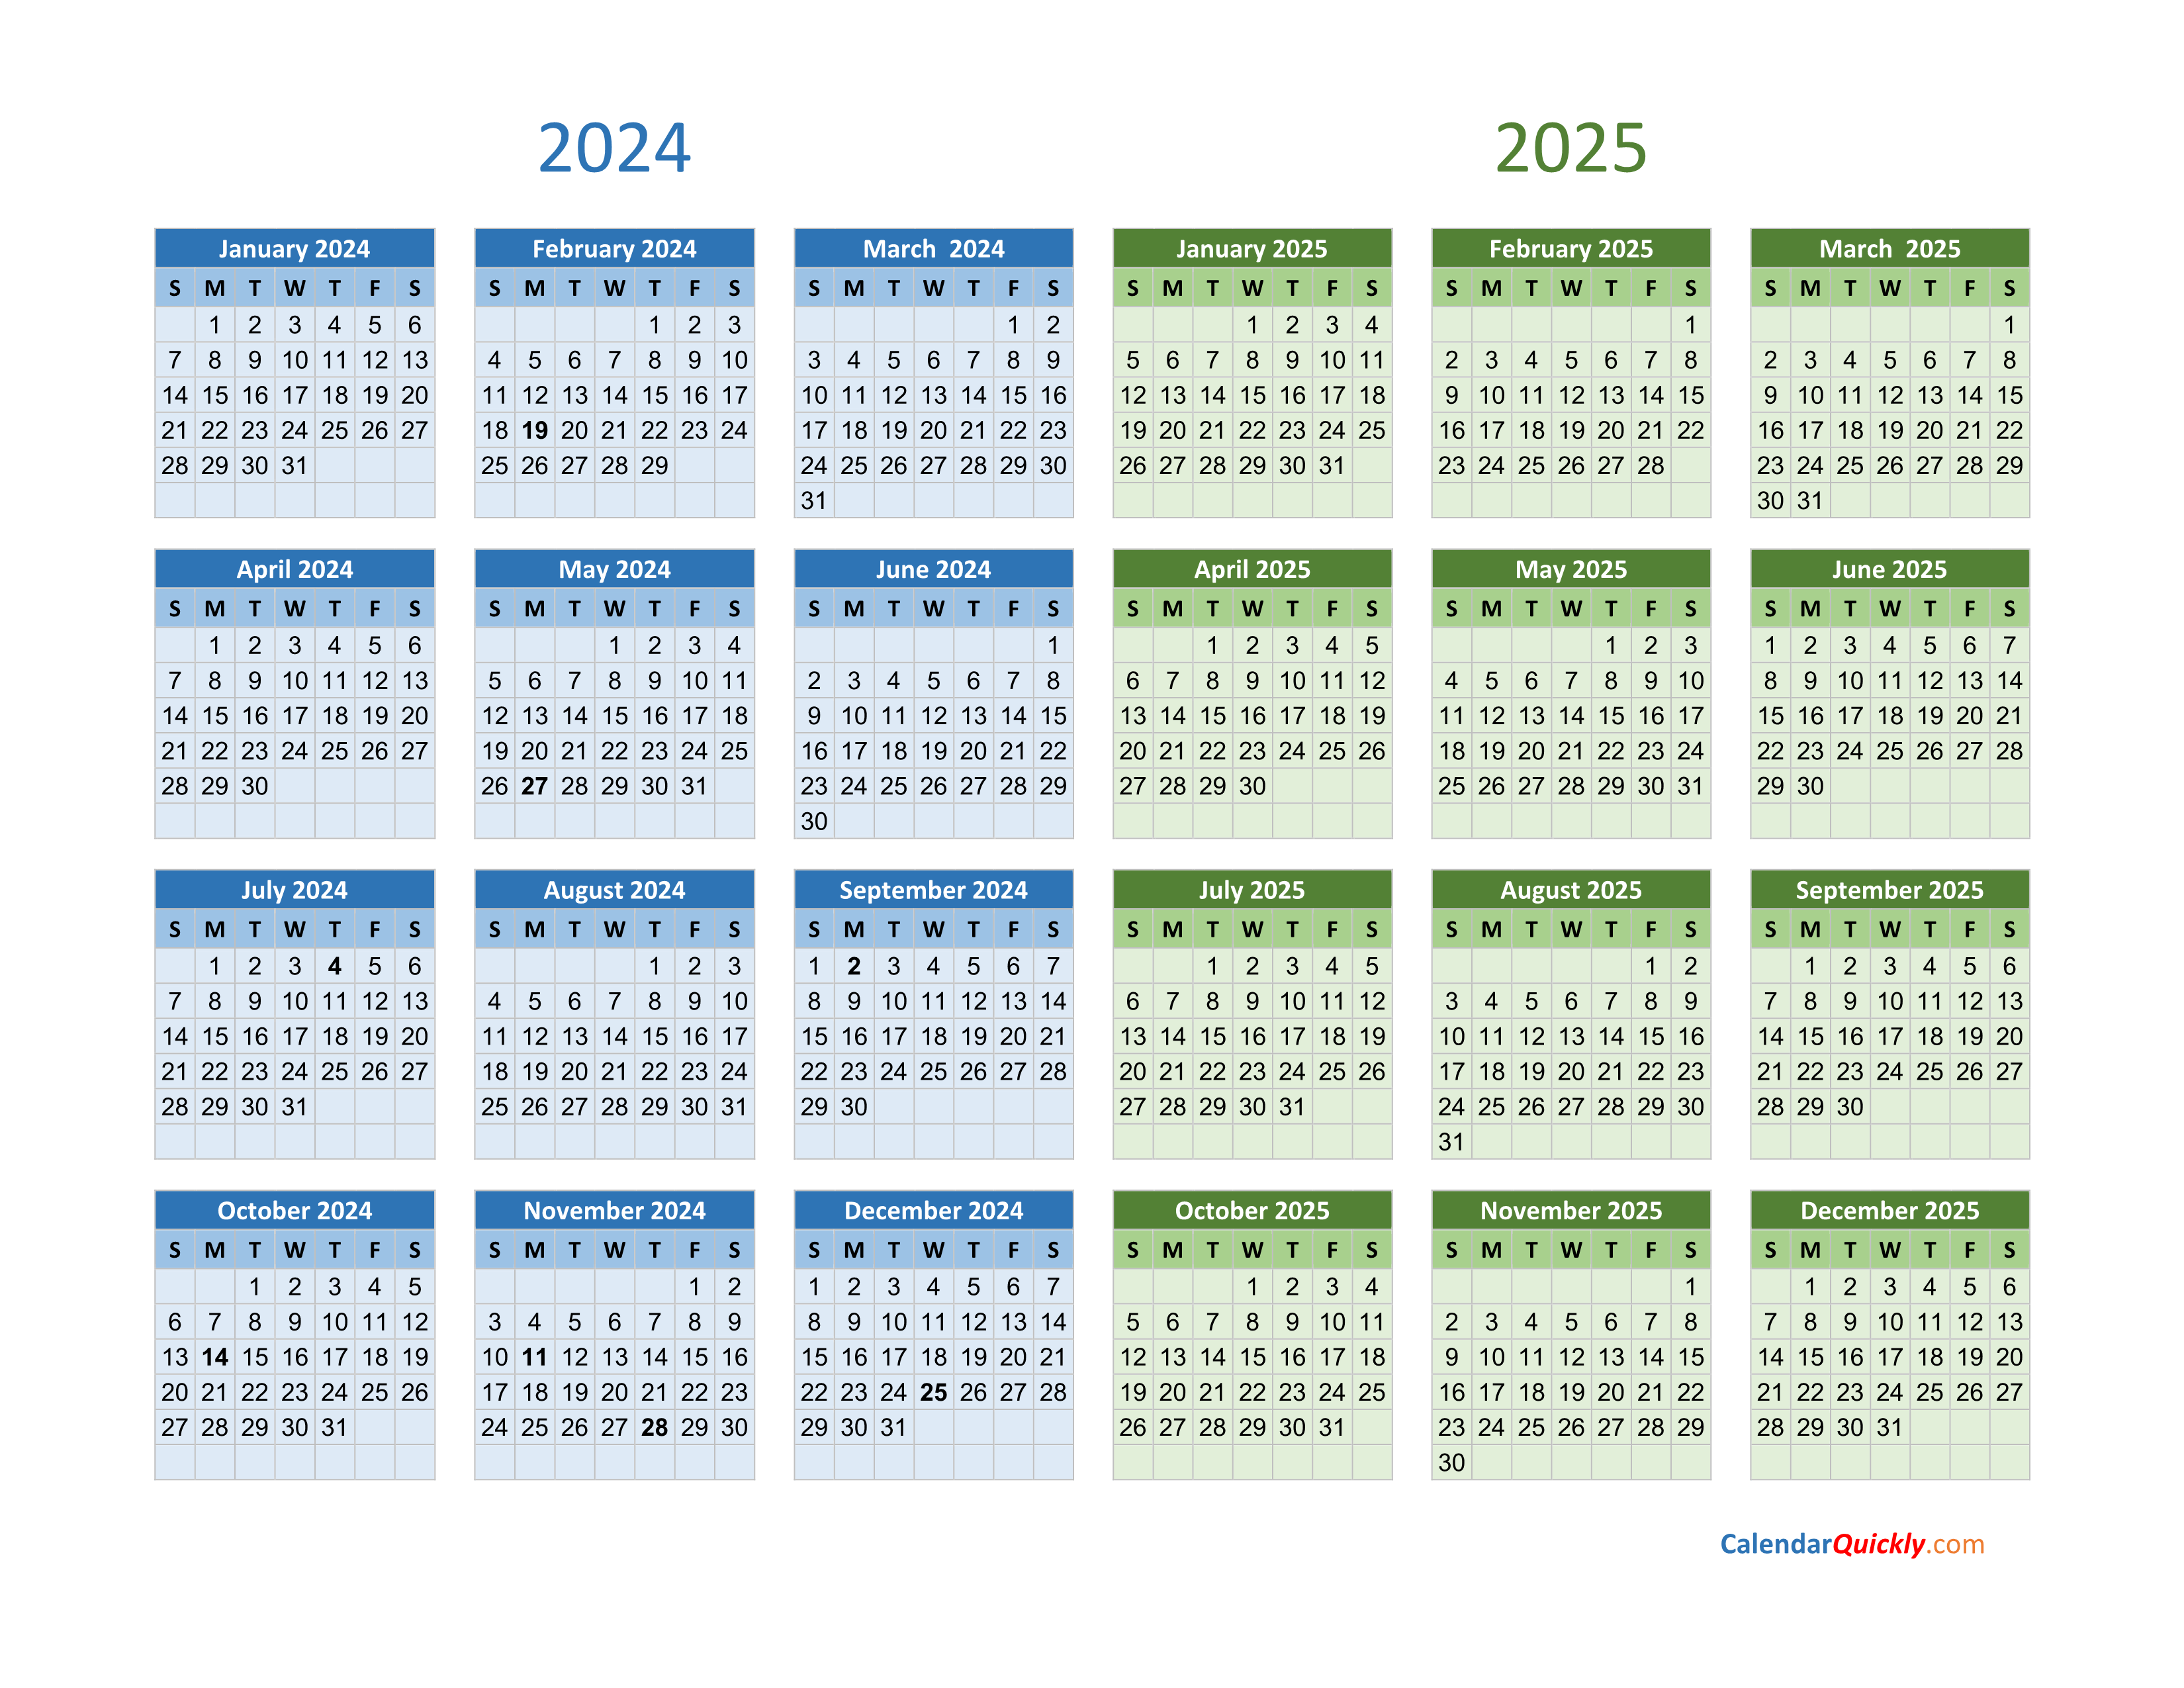 2024 And 2025 Calendar | Calendar Quickly intended for Free Printable Calendar 2024 And 2025 With Holidays